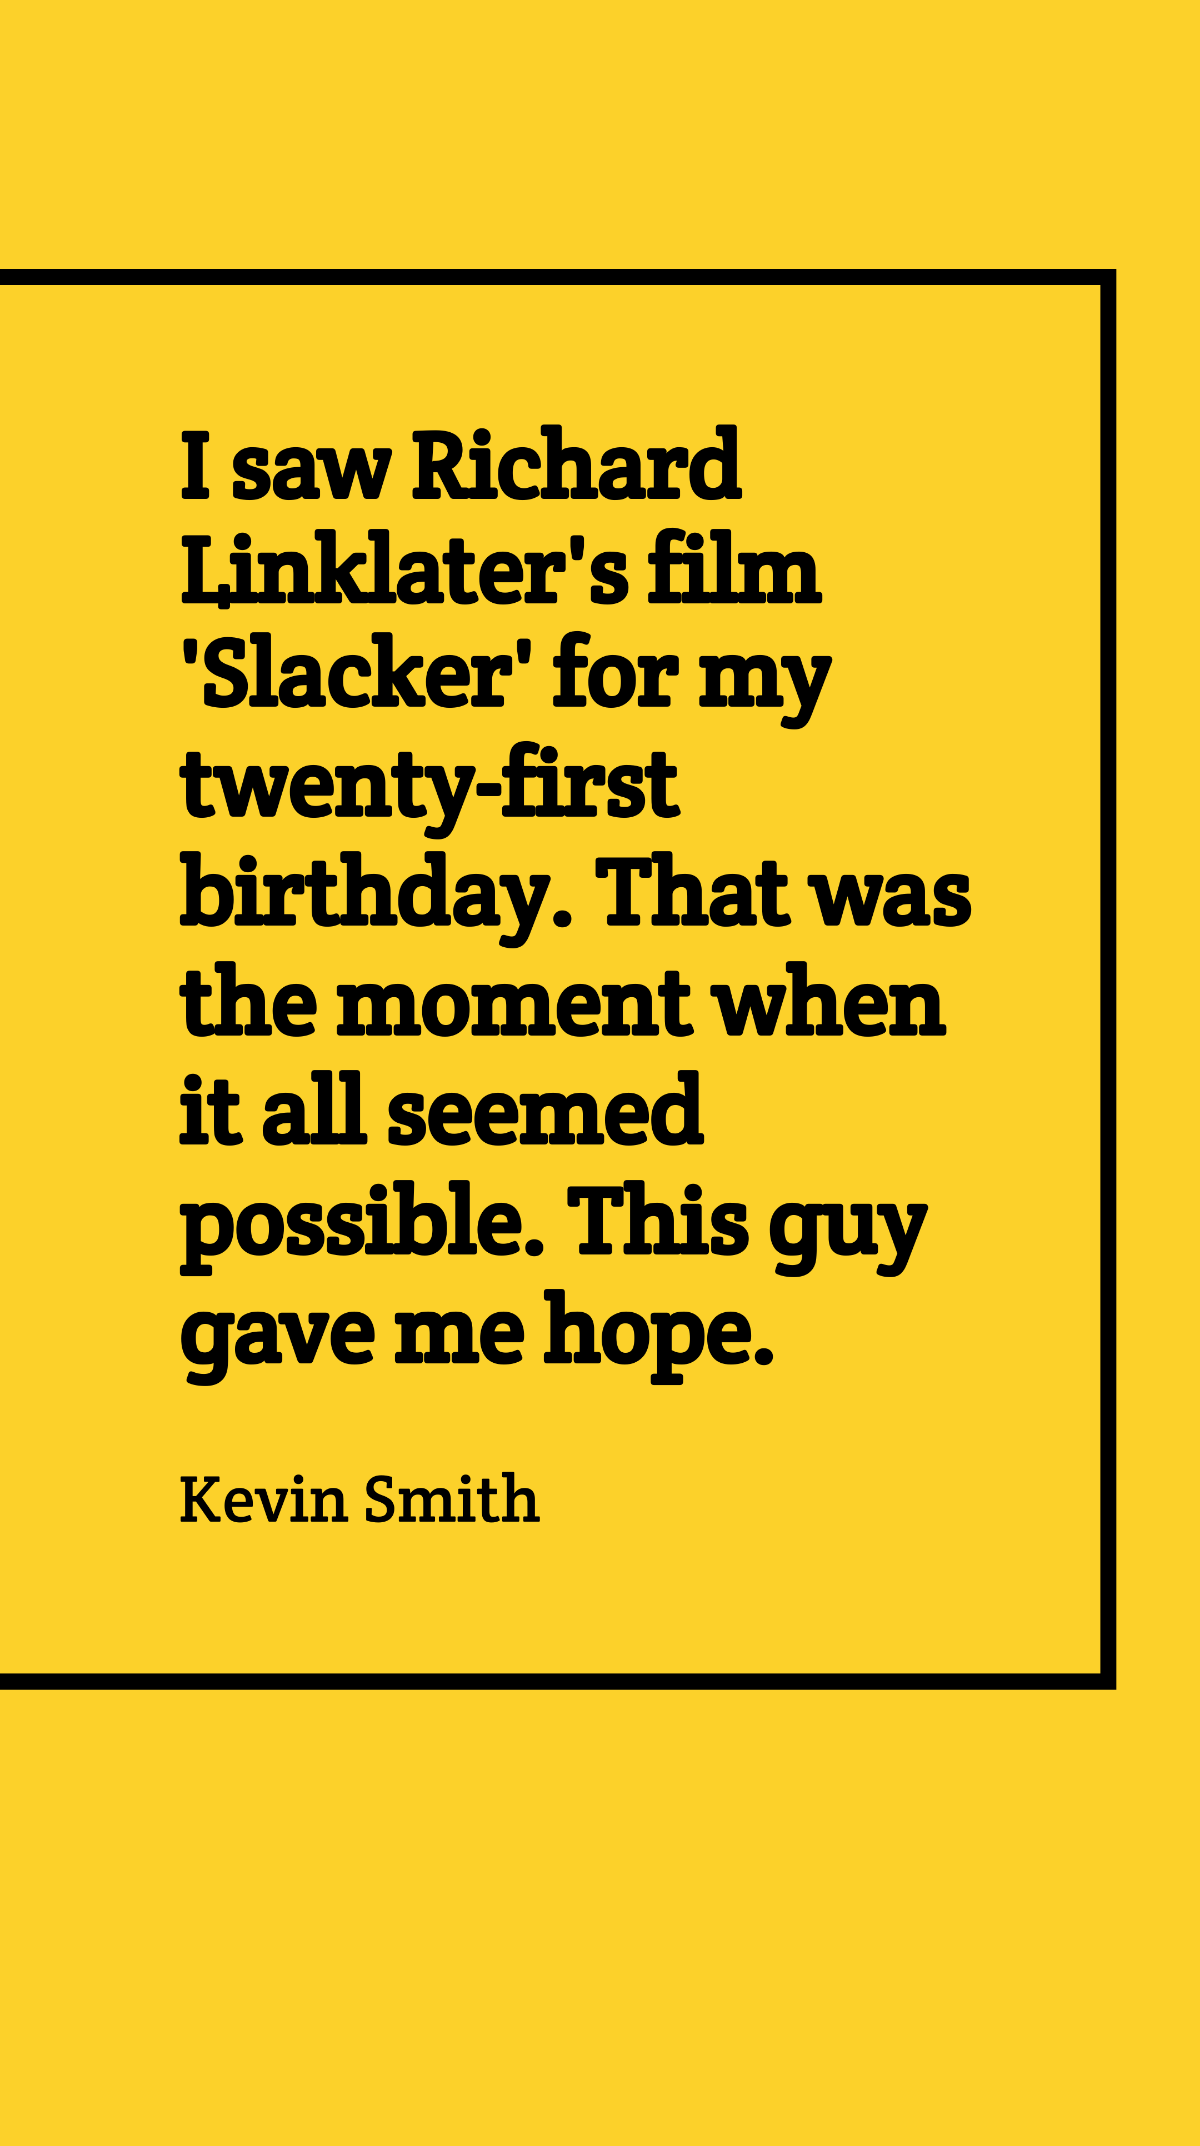 Kevin Smith - I saw Richard Linklater's film 'Slacker' for my twenty-first birthday. That was the moment when it all seemed possible. This guy gave me hope. Template